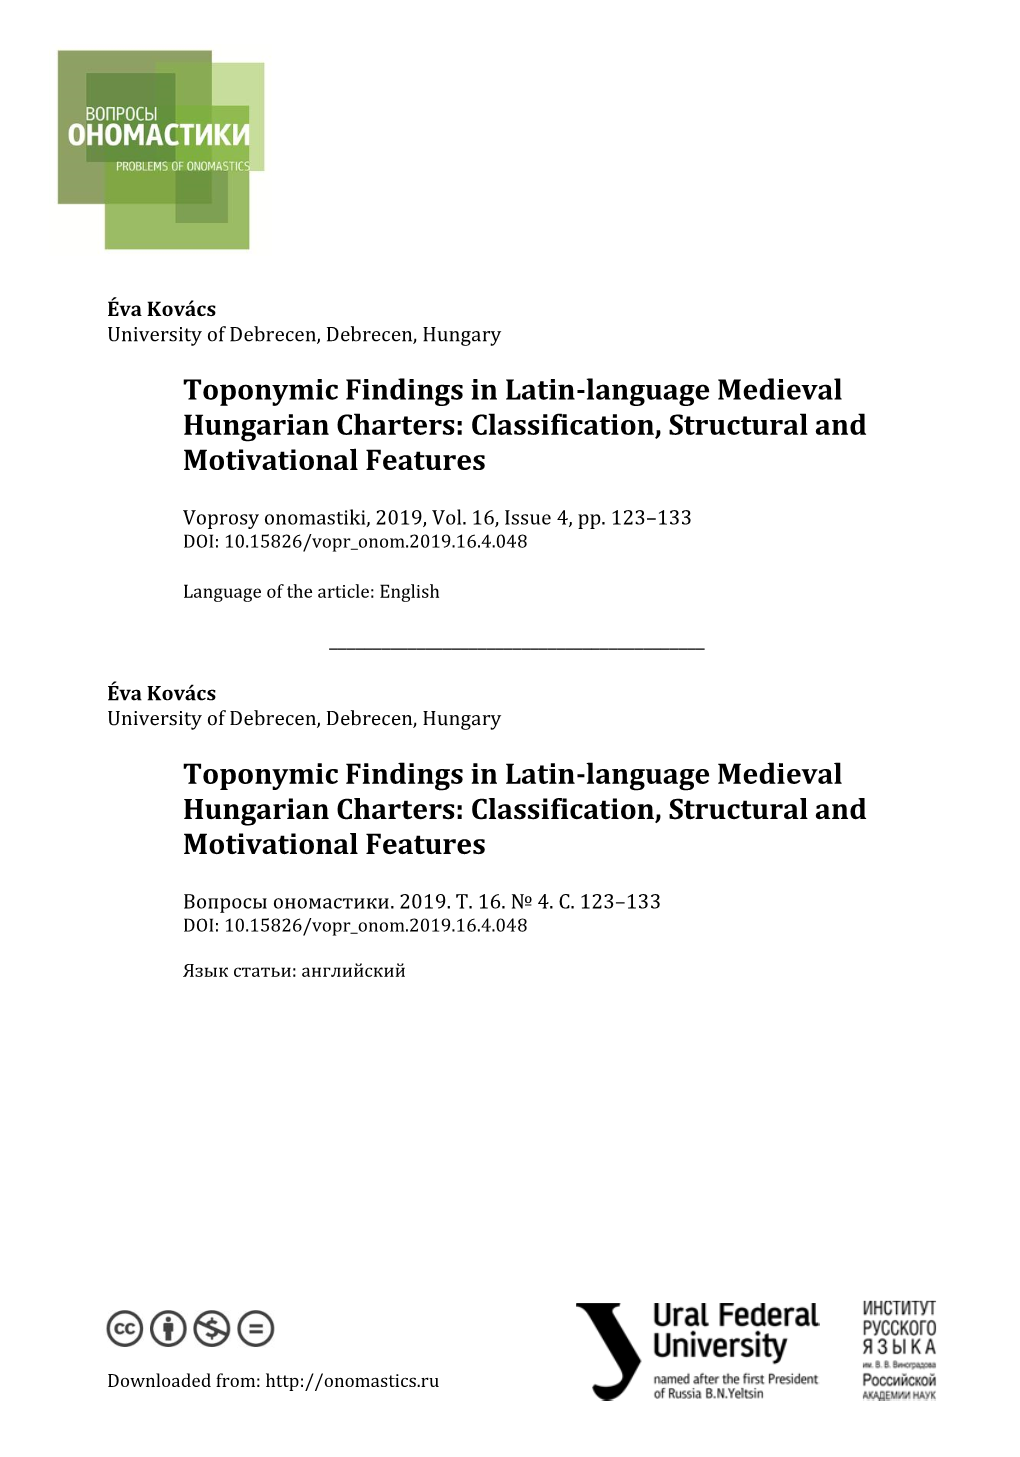 Toponymic Findings in Latin-Language Medieval Hungarian Charters: Classification, Structural and Motivational Features